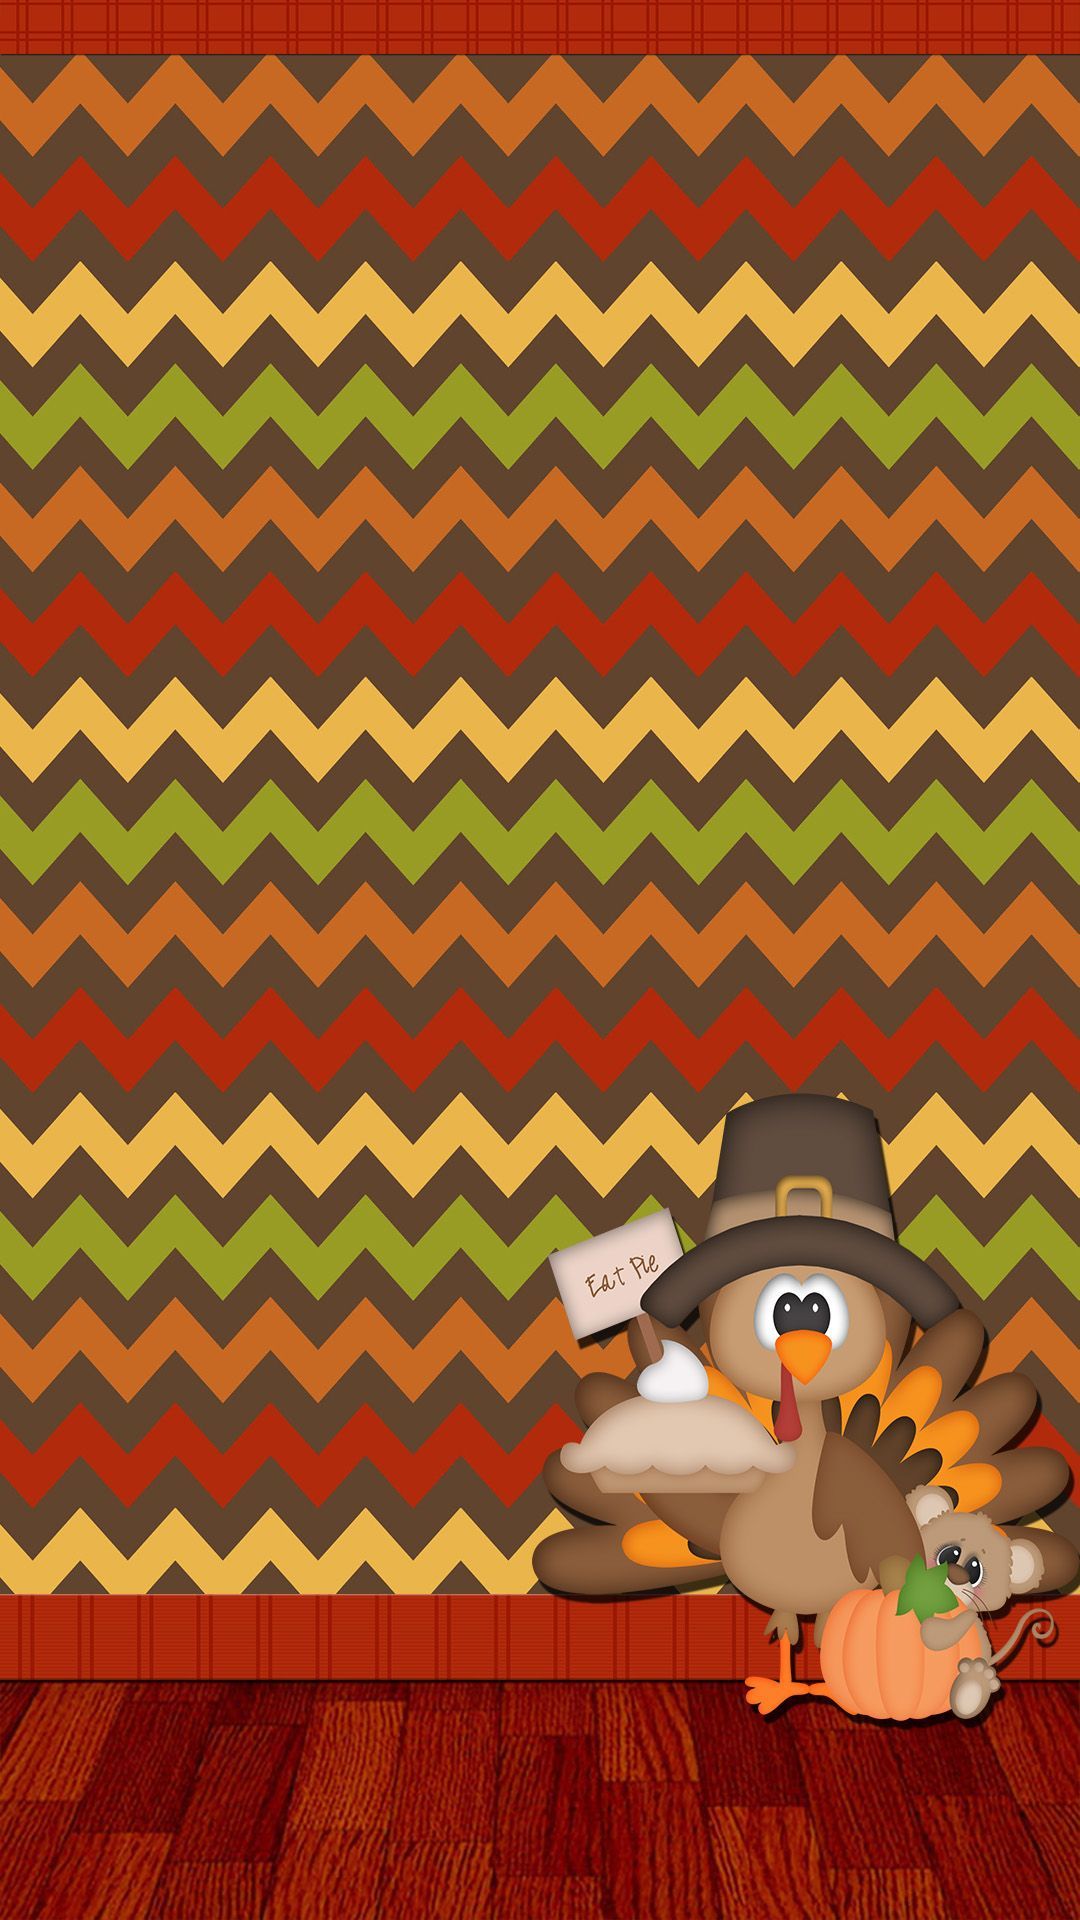 Thanksgiving Turkey Iphone Wallpapers